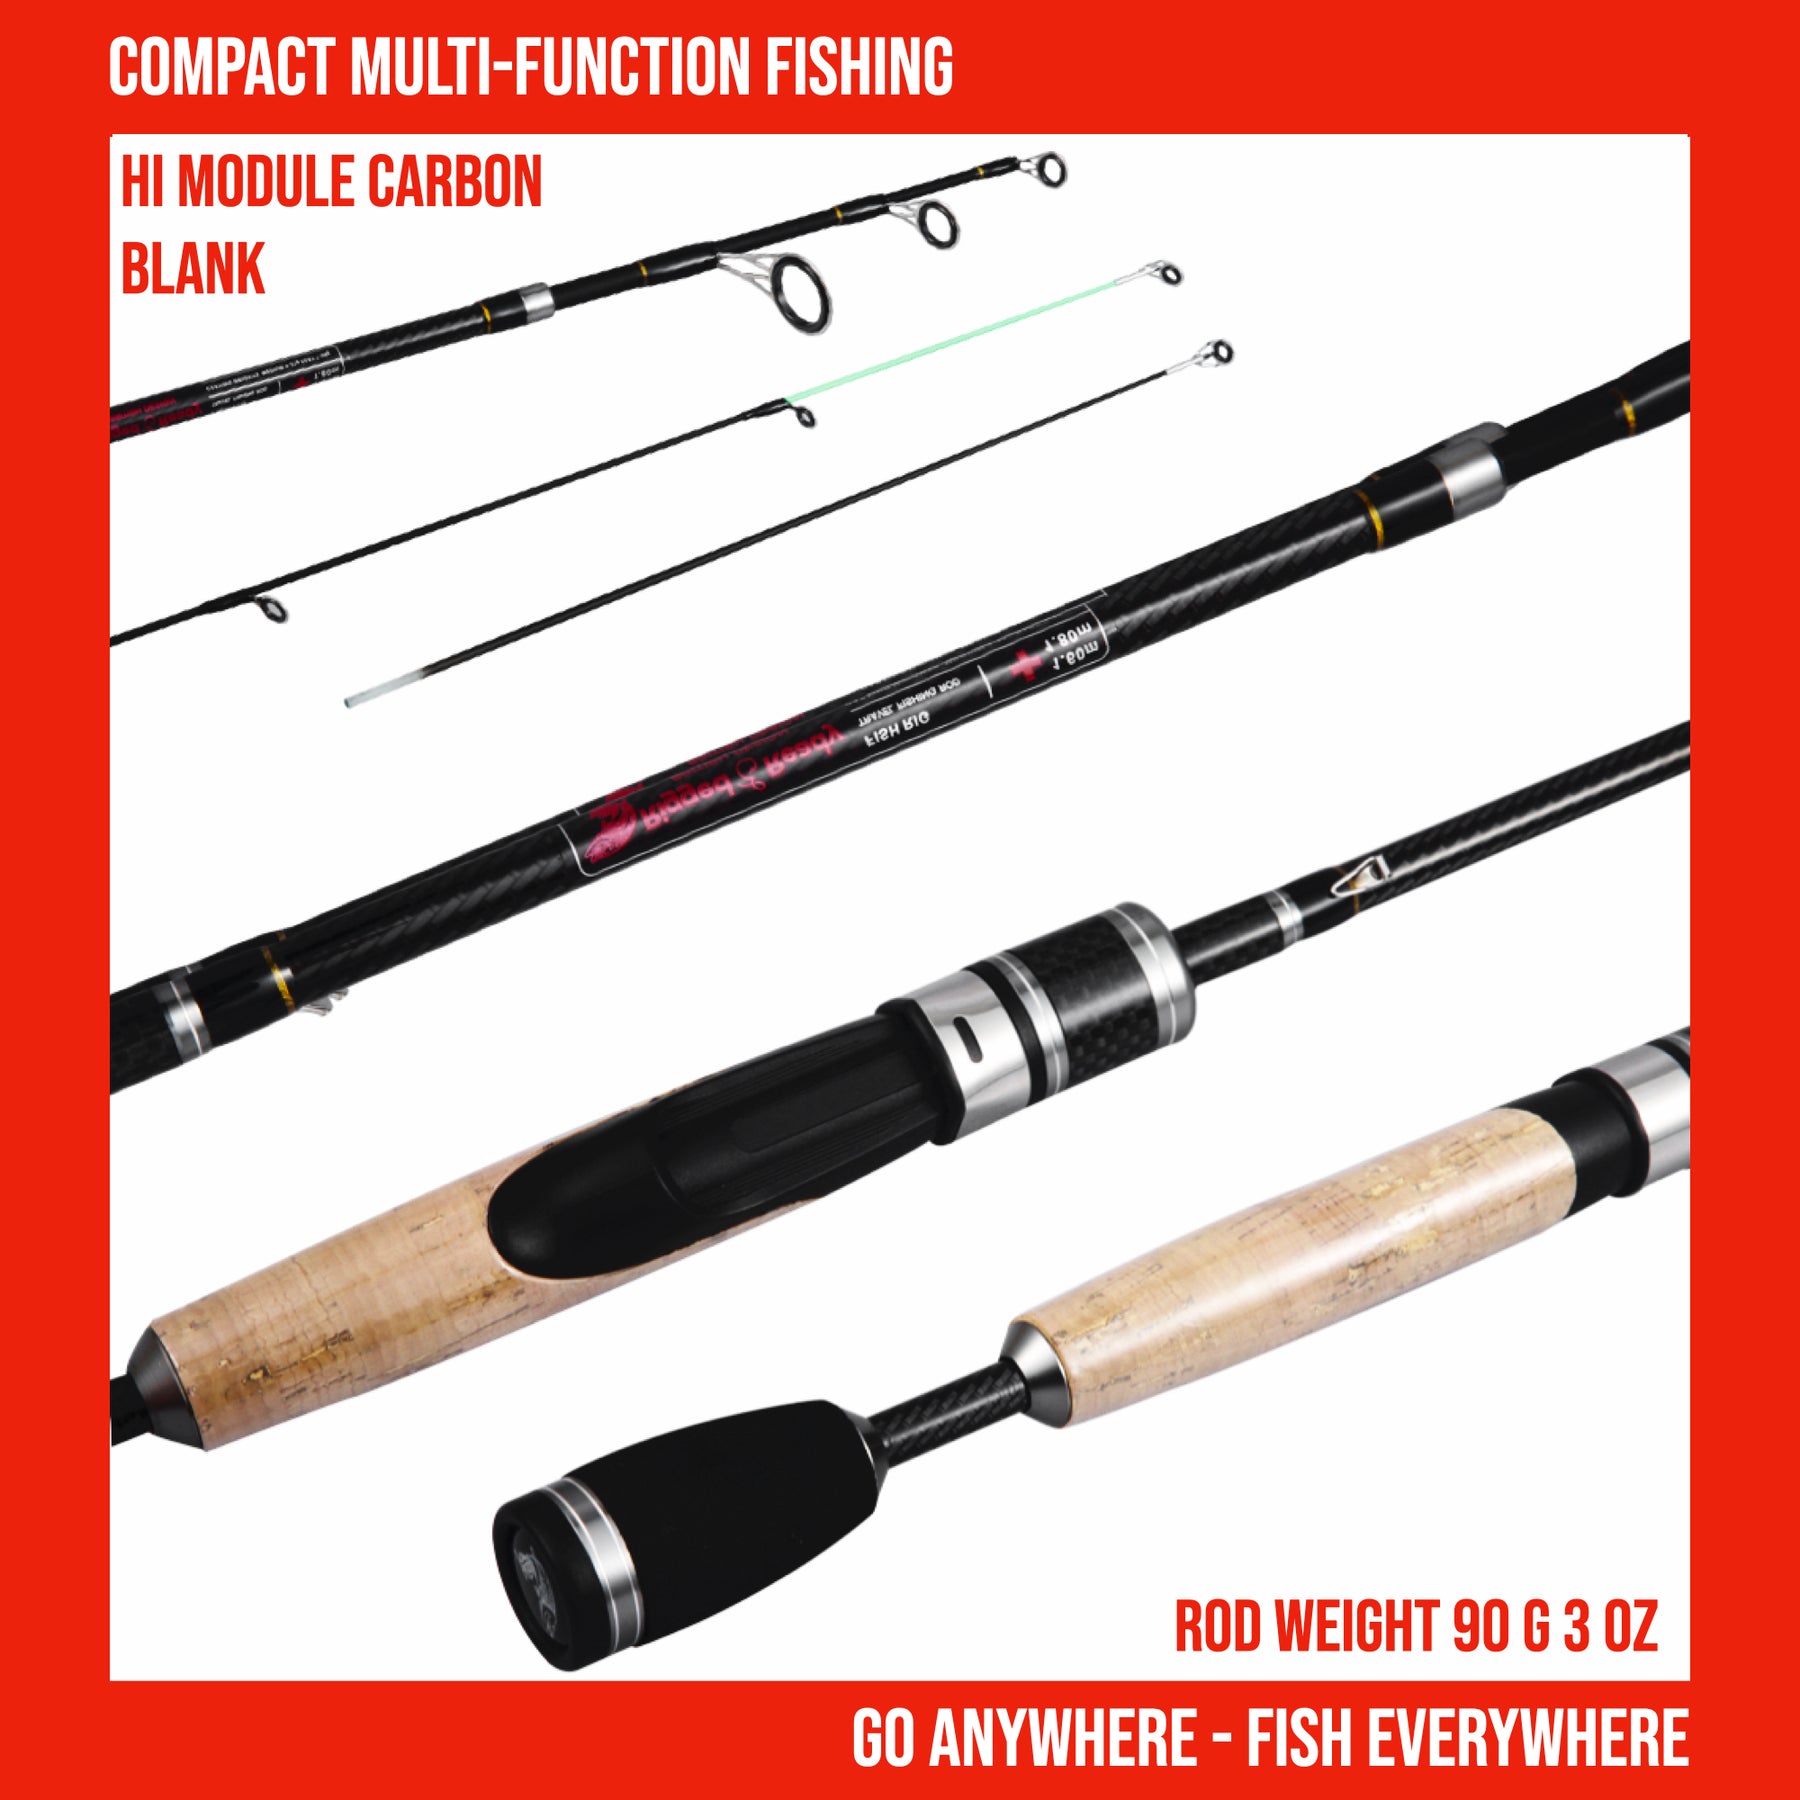 Fish Rig 180 Super LIghtweight Tele Rod + 2 tips = 180 5'11 & 160cm 5'4 –  Rigged and Ready